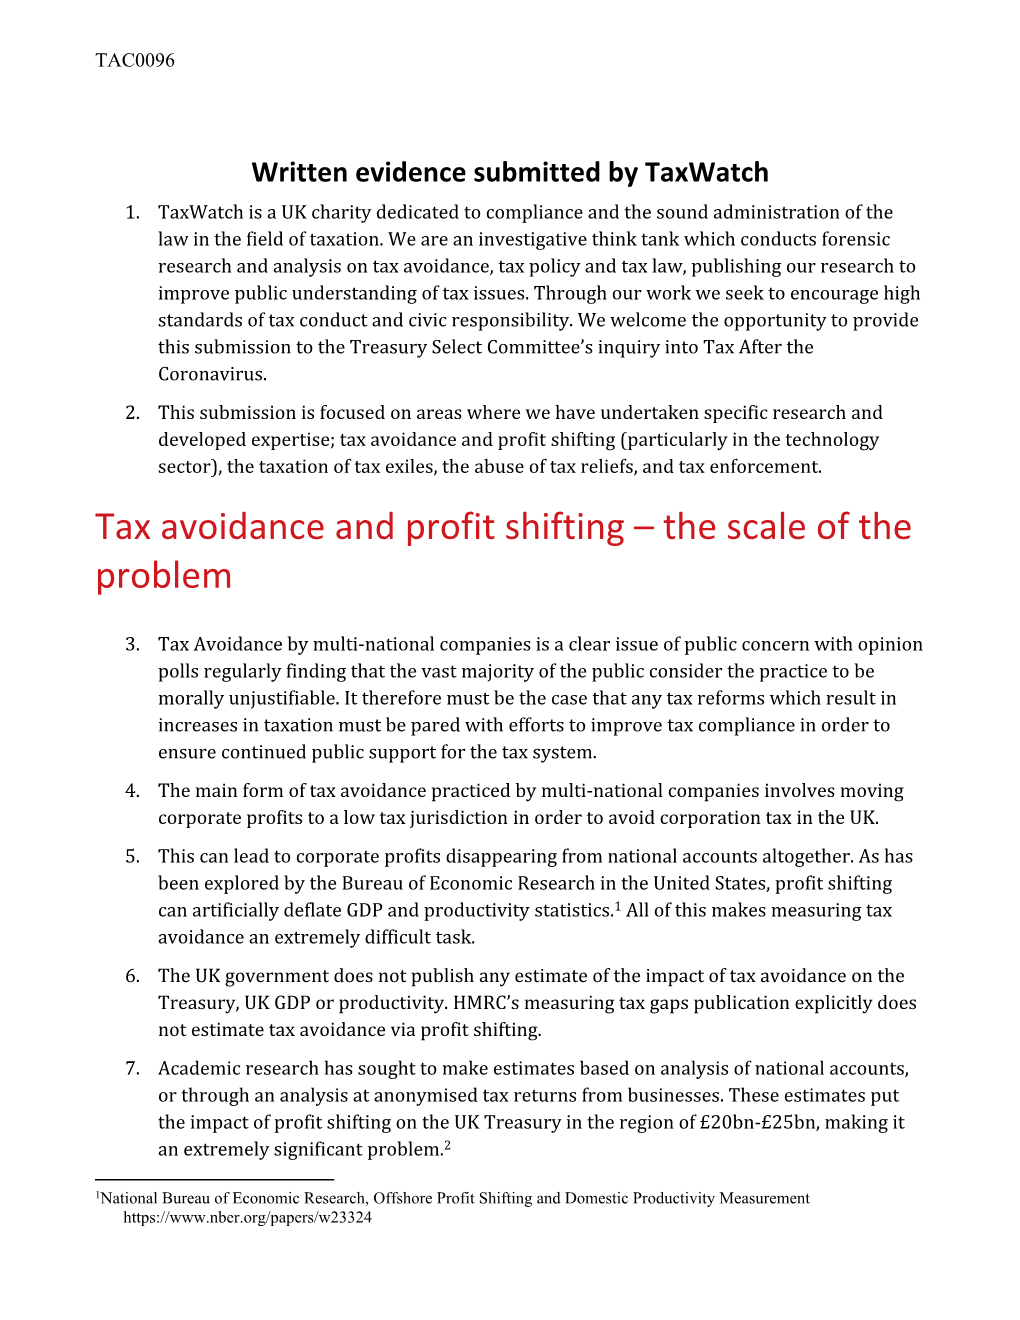 Tax Avoidance and Profit Shifting (Particularly in the Technology Sector), the Taxation of Tax Exiles, the Abuse of Tax Reliefs, and Tax Enforcement